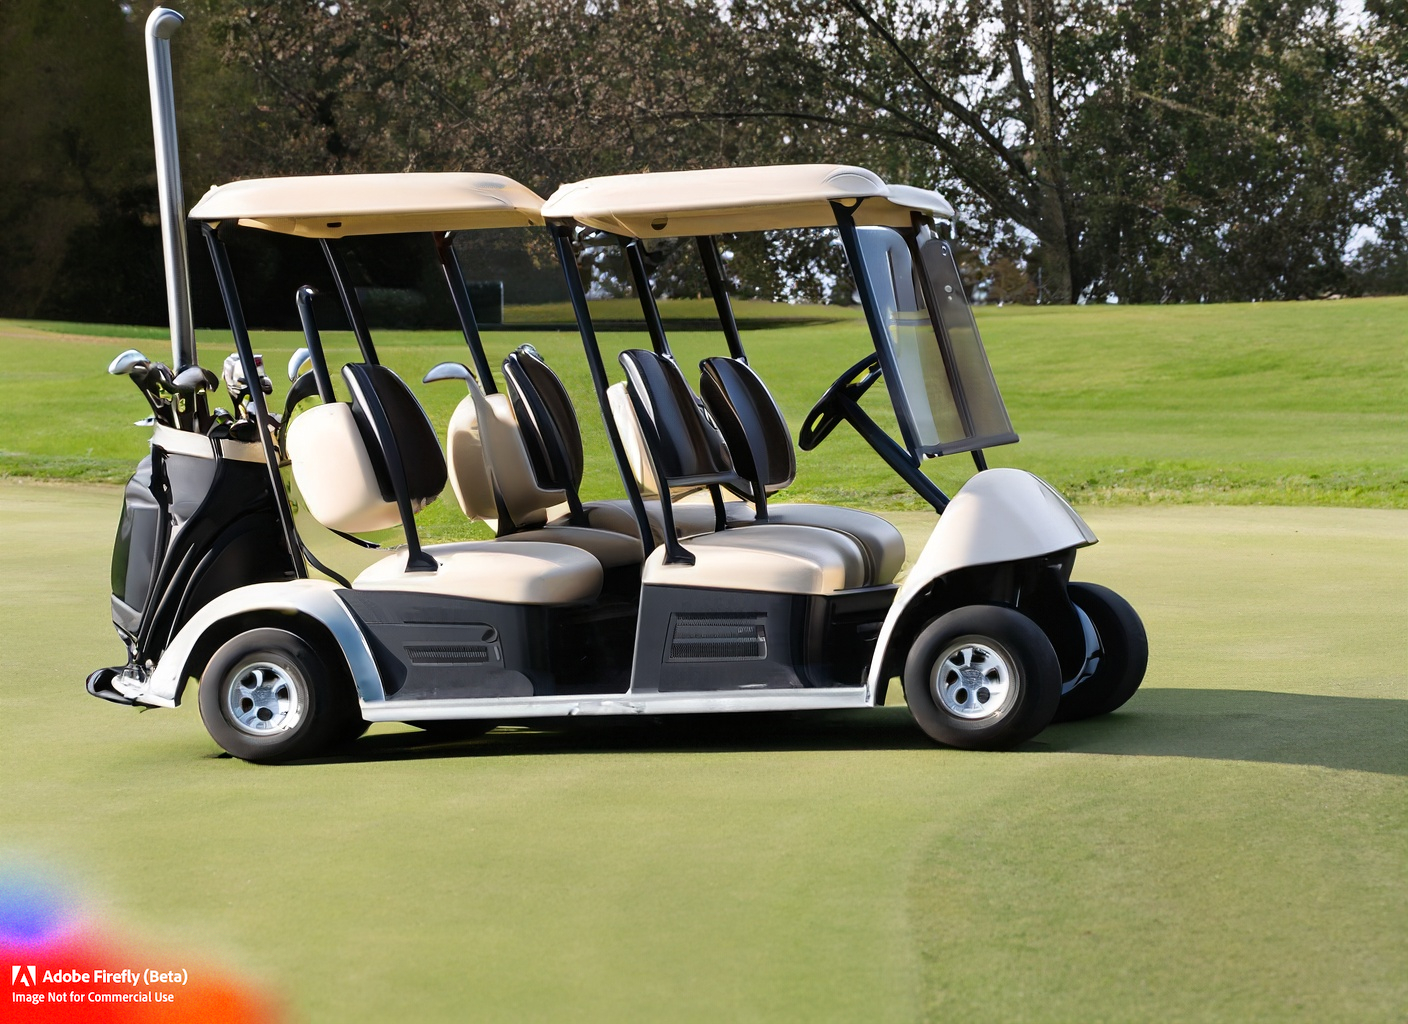 What Maintenance Is Required For An Electric Golf Cart?